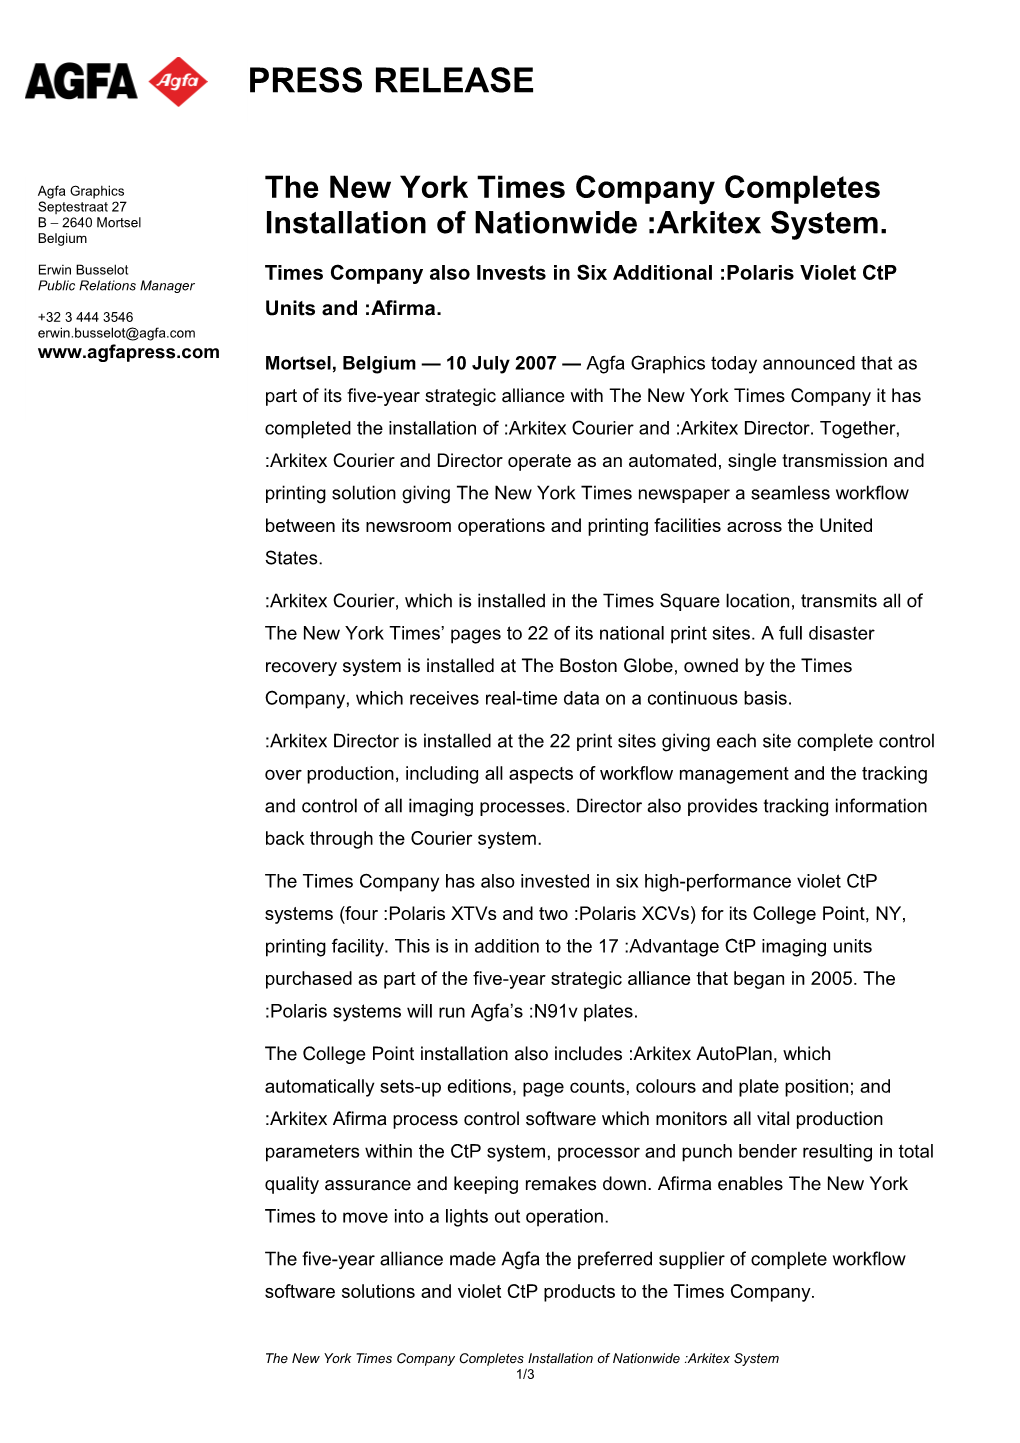 The New York Times Company Completes Installation of Nationwide :Arkitex System